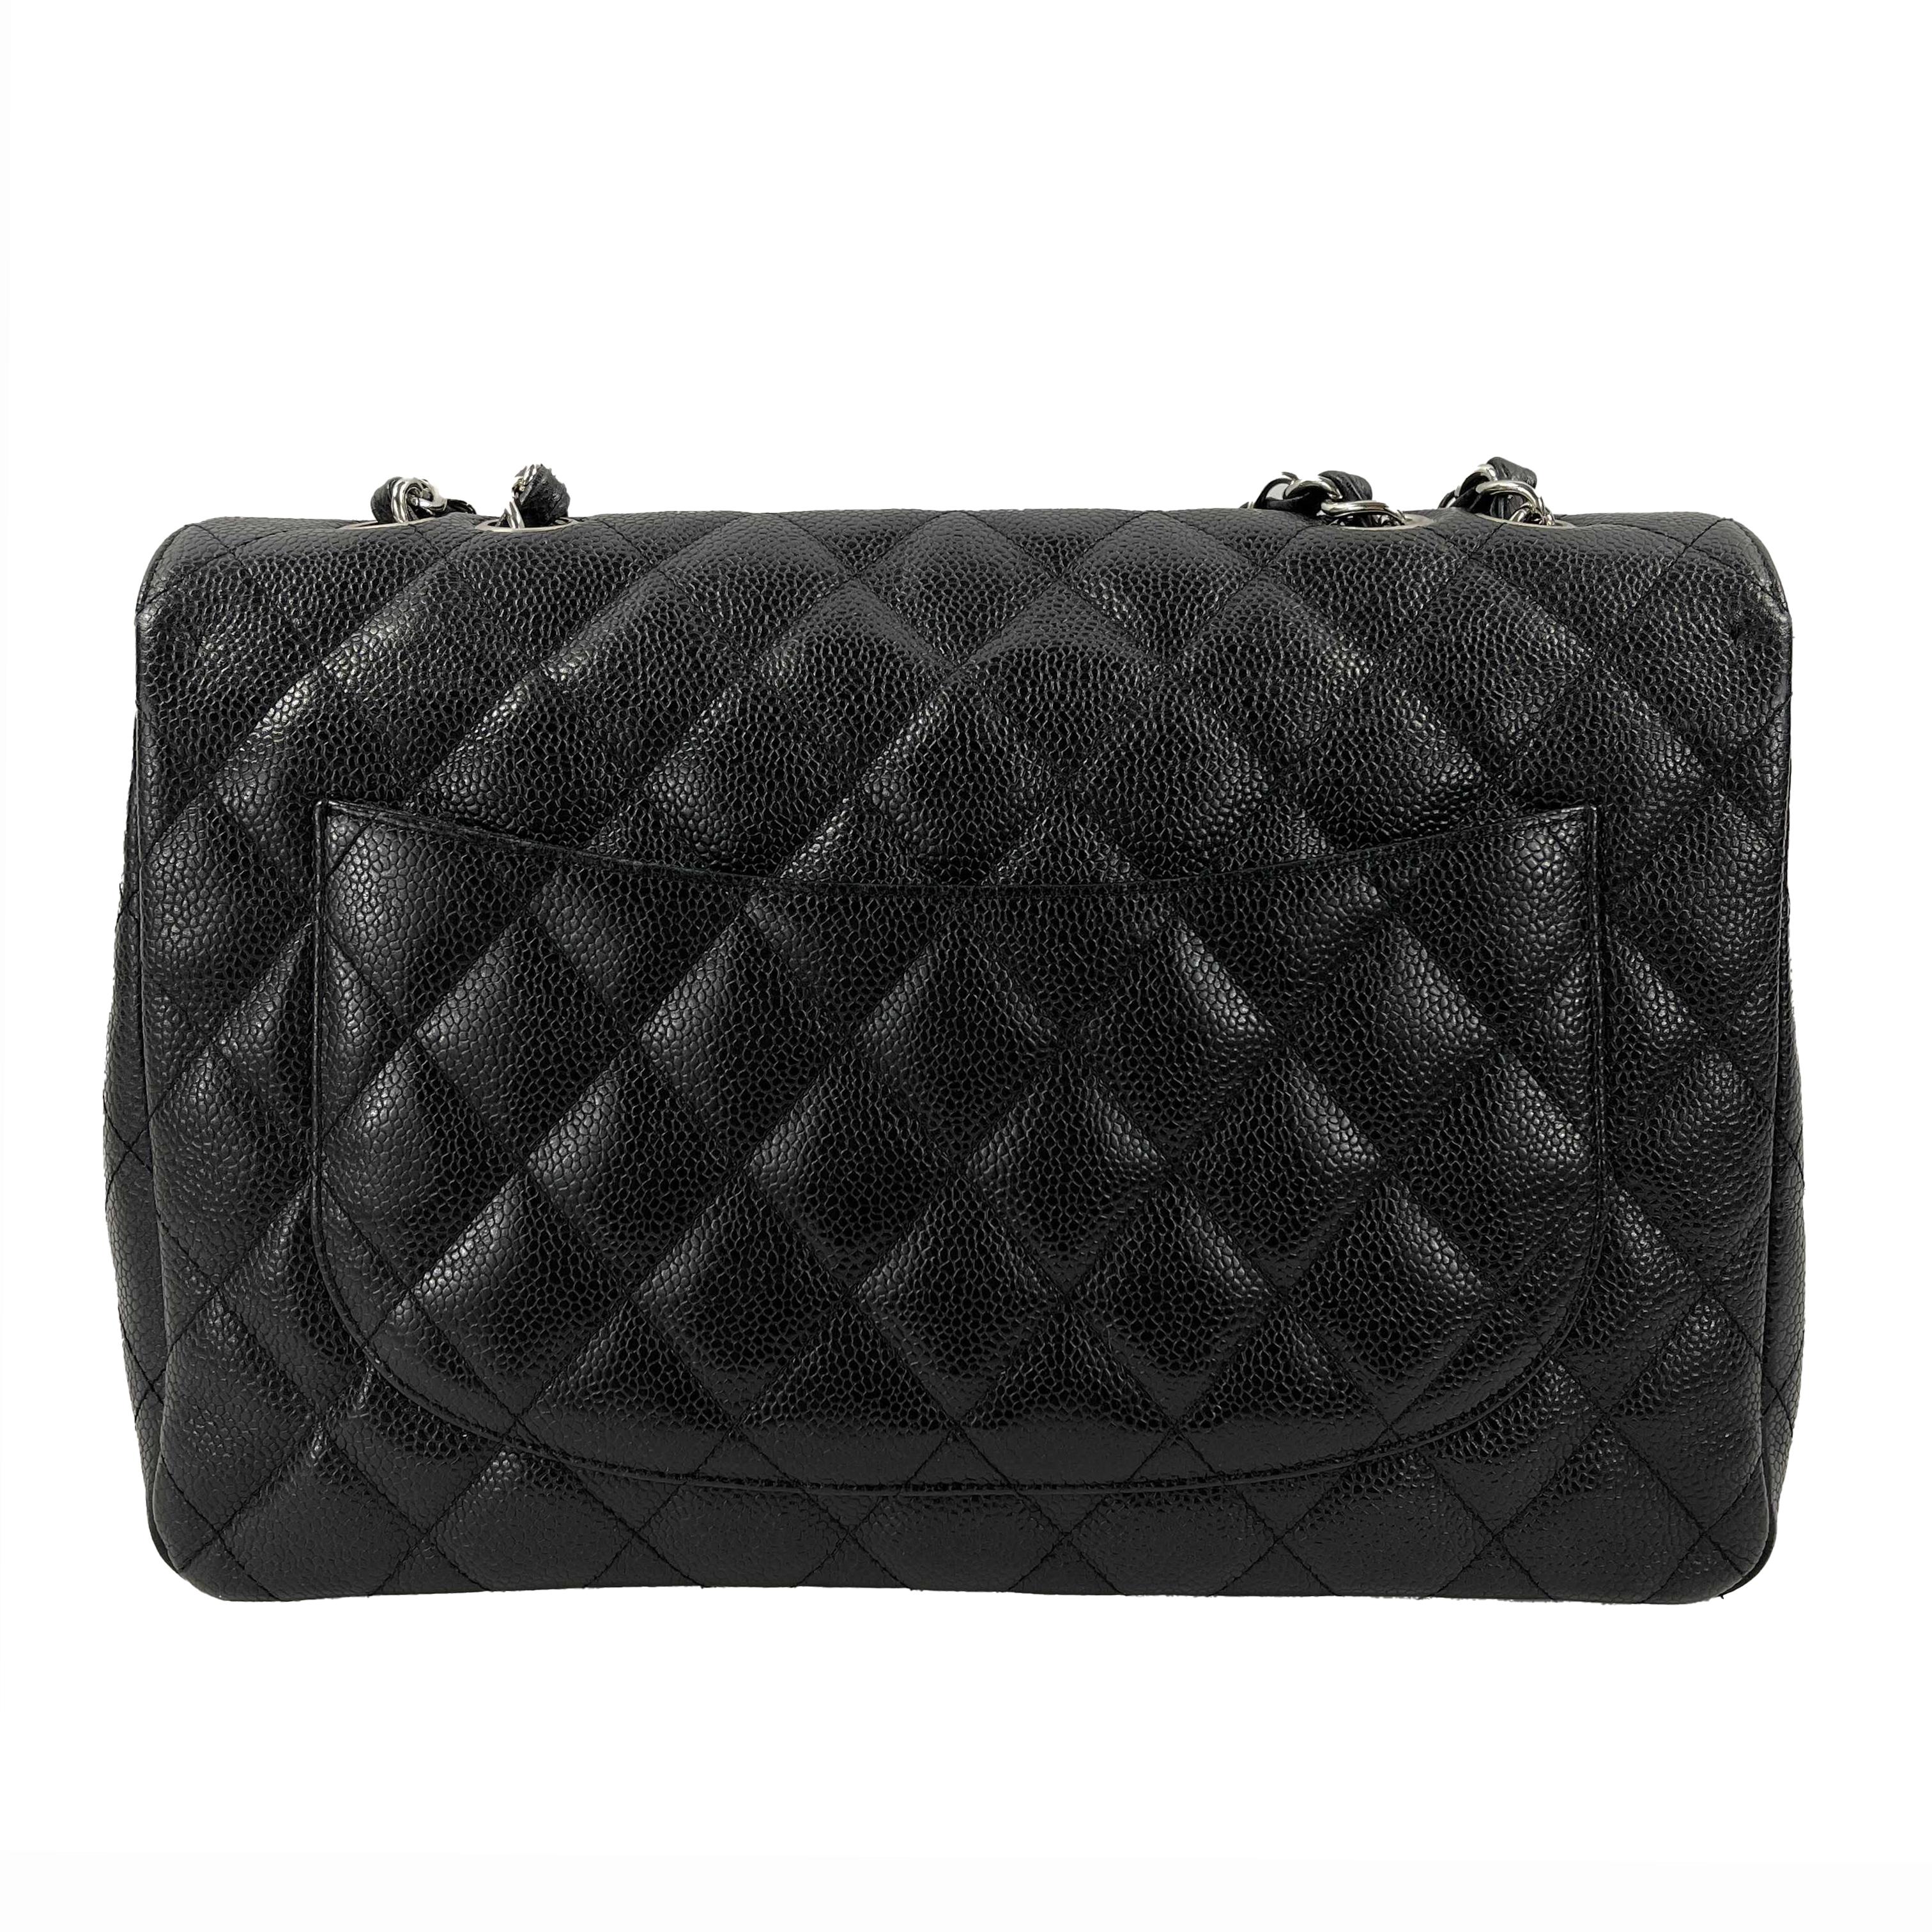 * This Chanel classic jumbo flap handbag is from the 2005 to 2006 collection.
* It's crafted black caviar quilted stitched leather and silver-toned hardware.
* The bags opens using a CC turn-lock to a compartment lined in black smooth leather with a